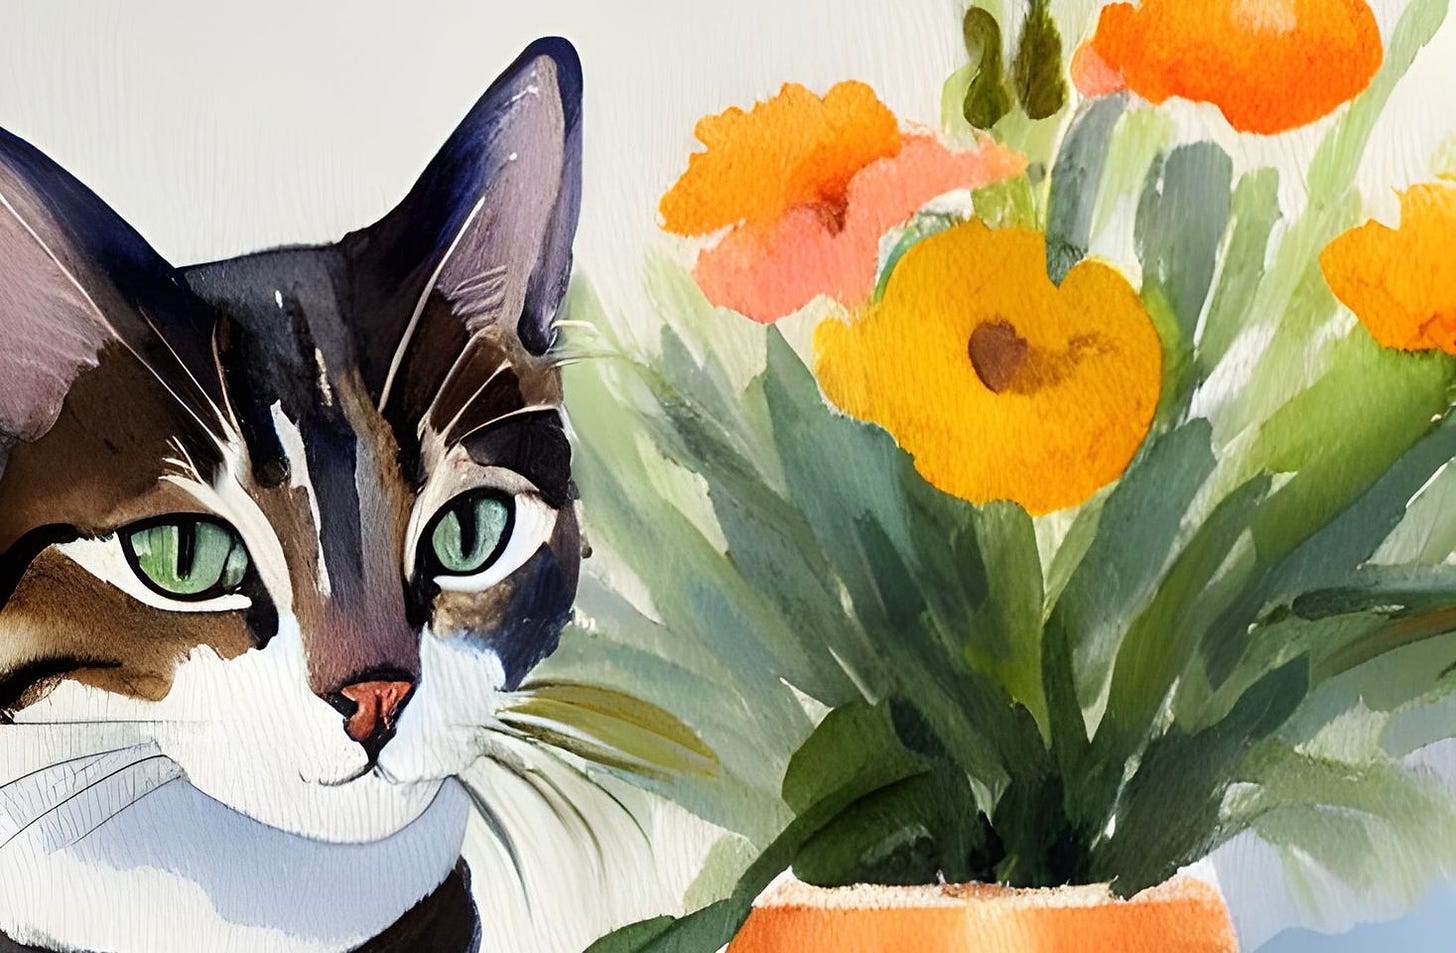 May be an image of cat and flower